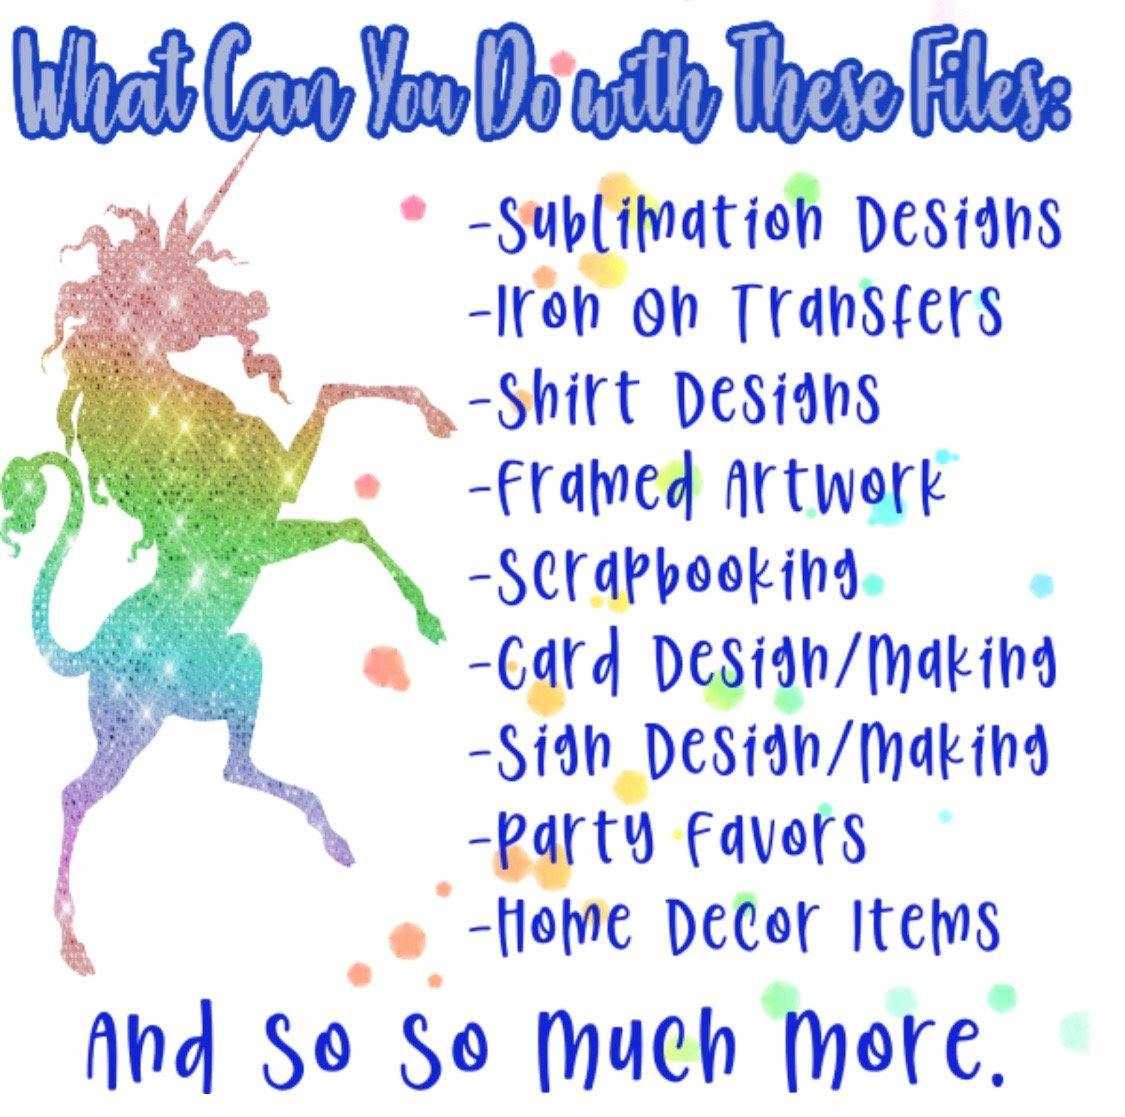 All American Dad Forth of July/ Independence Day/ Memorial Day PNG Digital Download, Sublimation Design - Unicorn Dreams Customized Creations